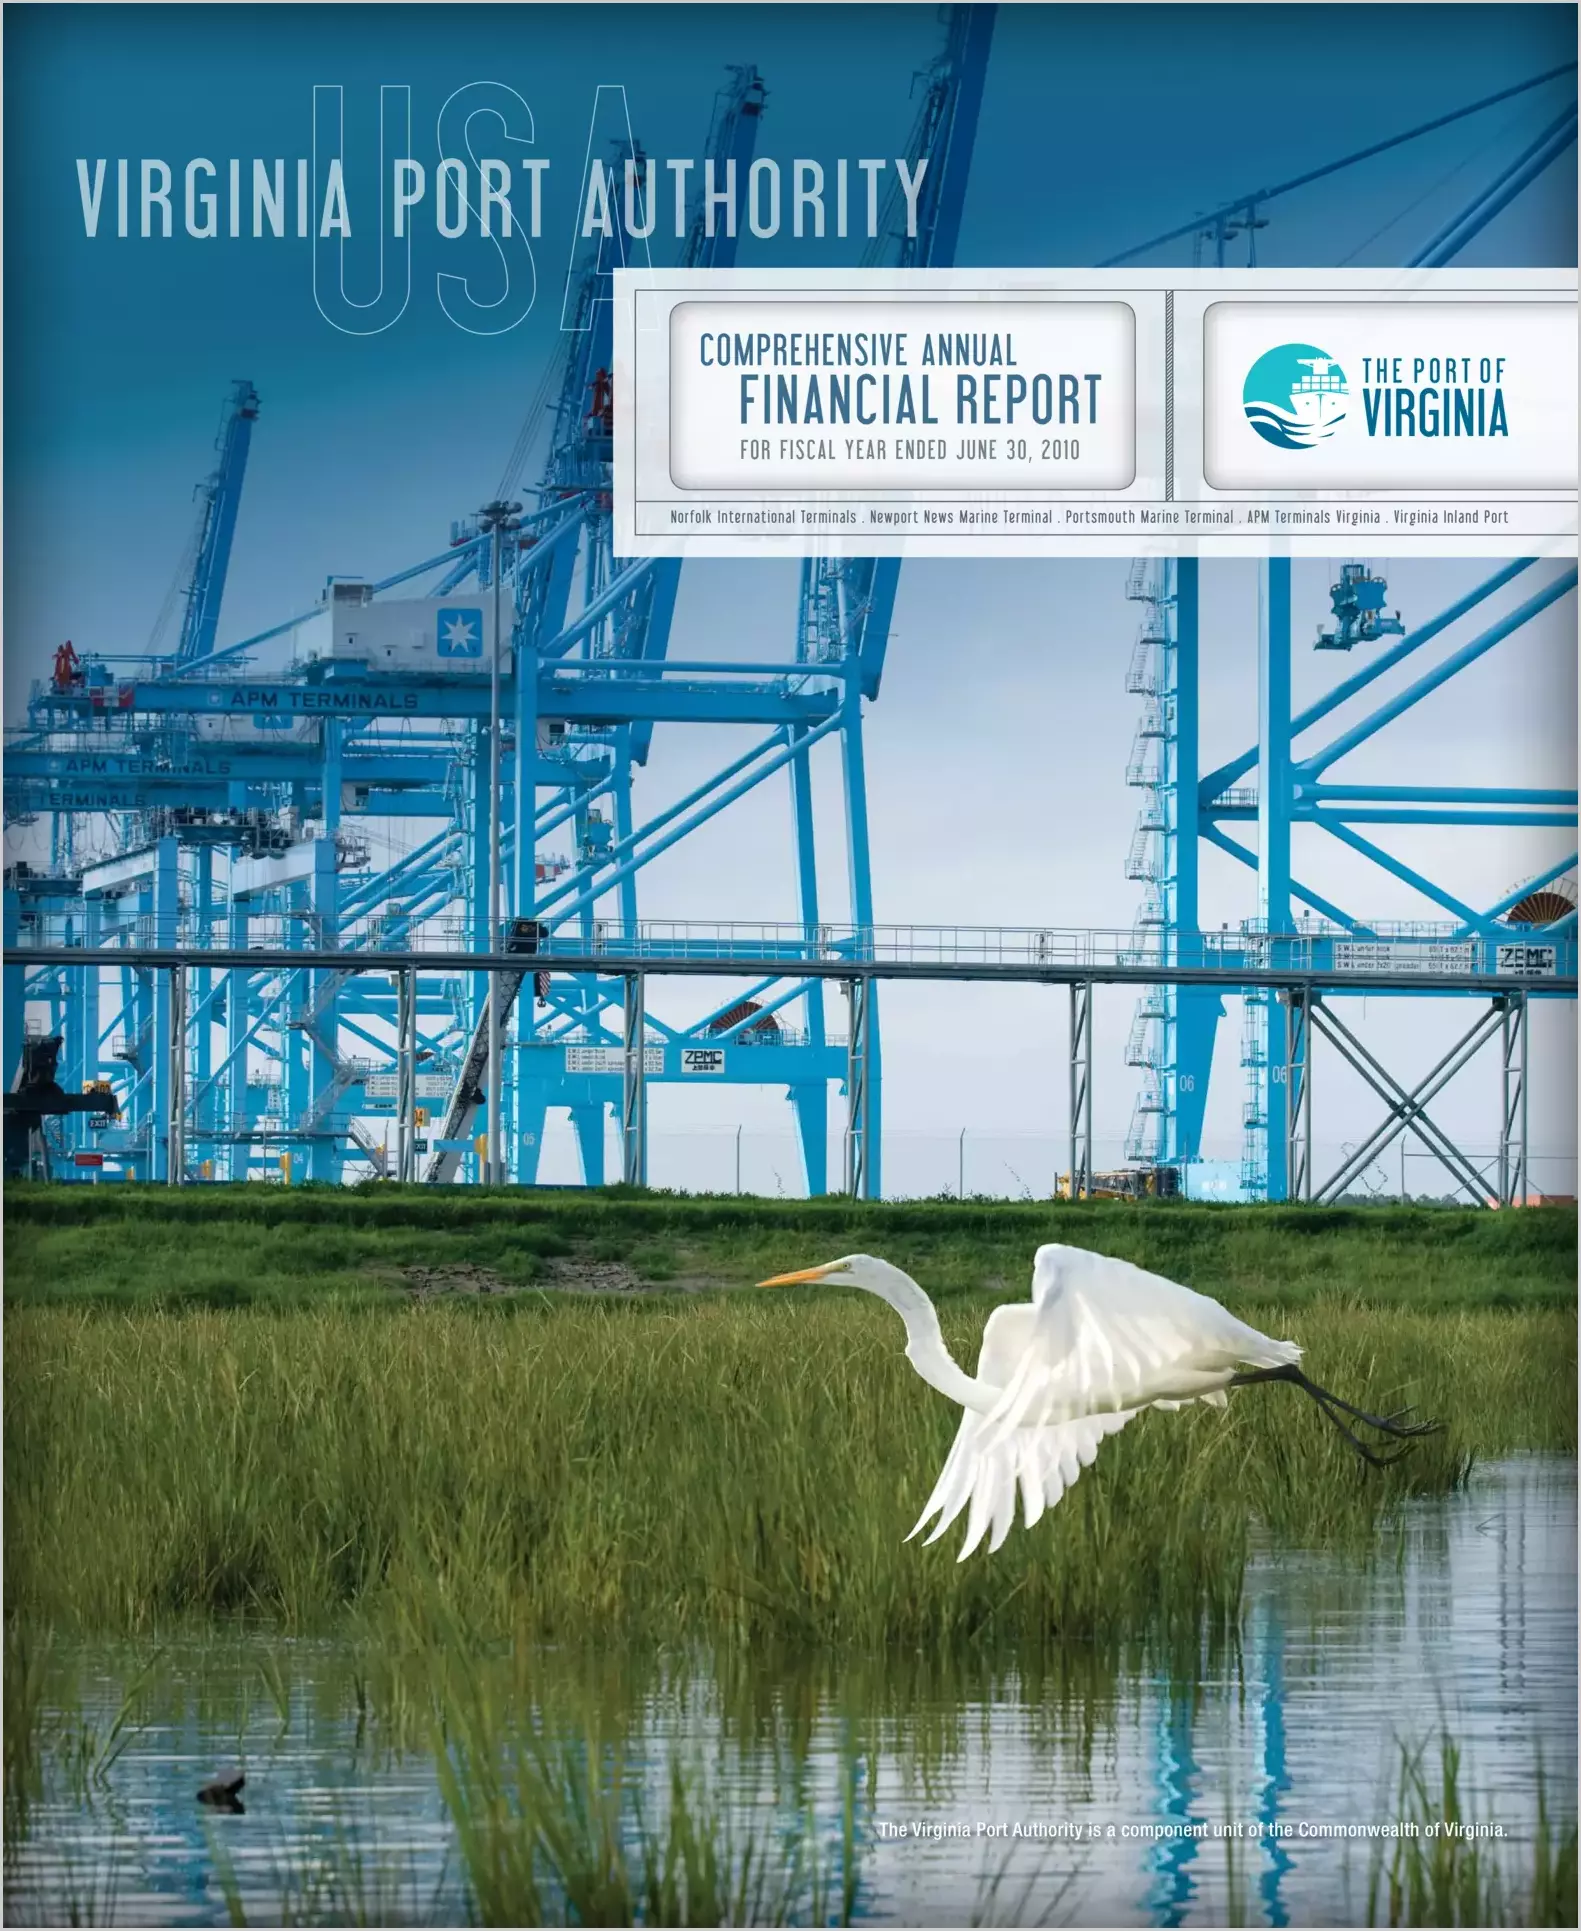 Virginia Port Authority Financial Statements Report for the year ended June 30, 2010